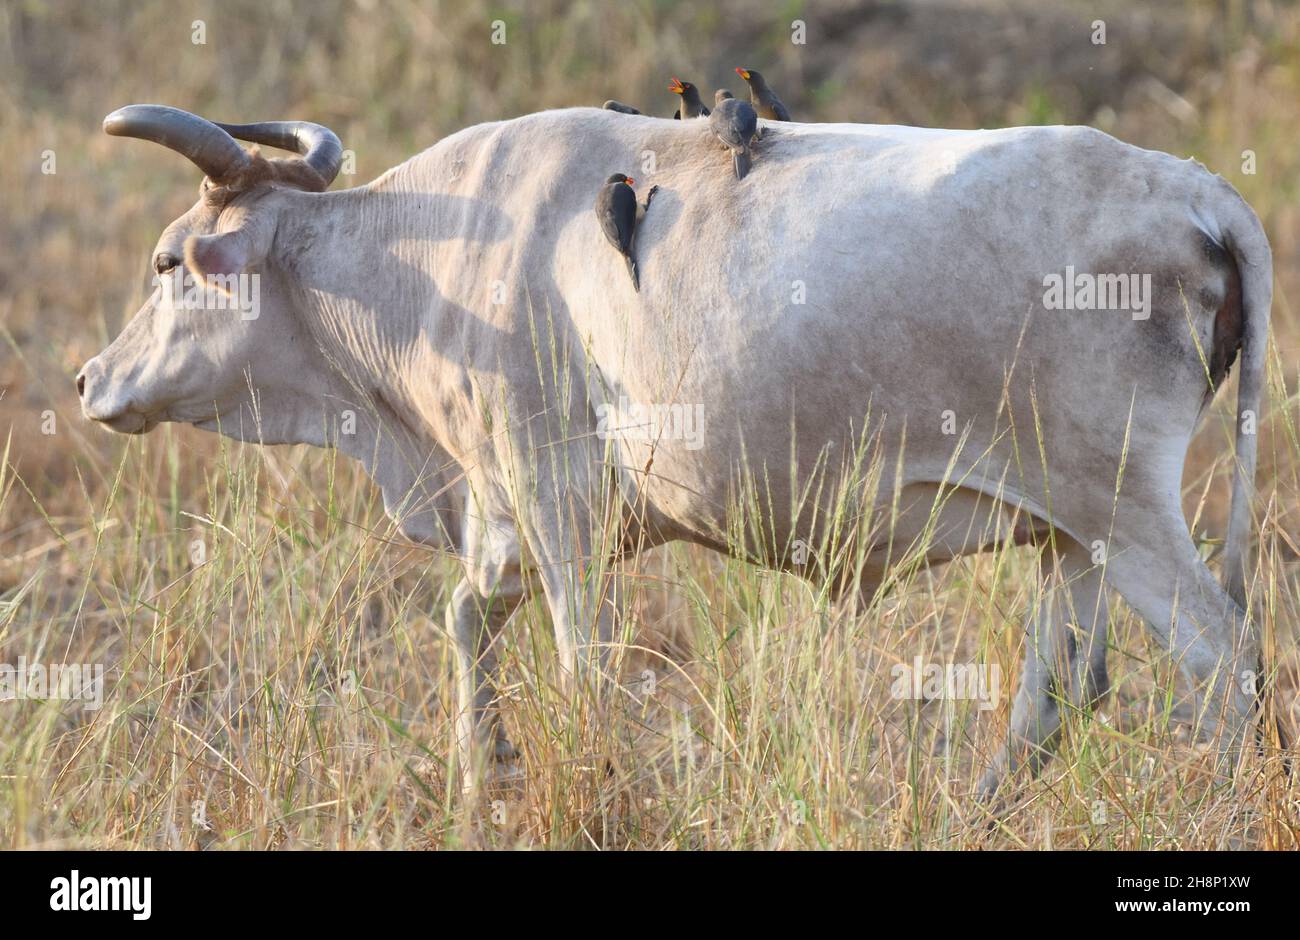 Yellow-billed oxpeckers (Buphagus africanus) on the back of a cow where they are searching for ticks and other invertebrates. Janjanbureh, The Republi Stock Photo